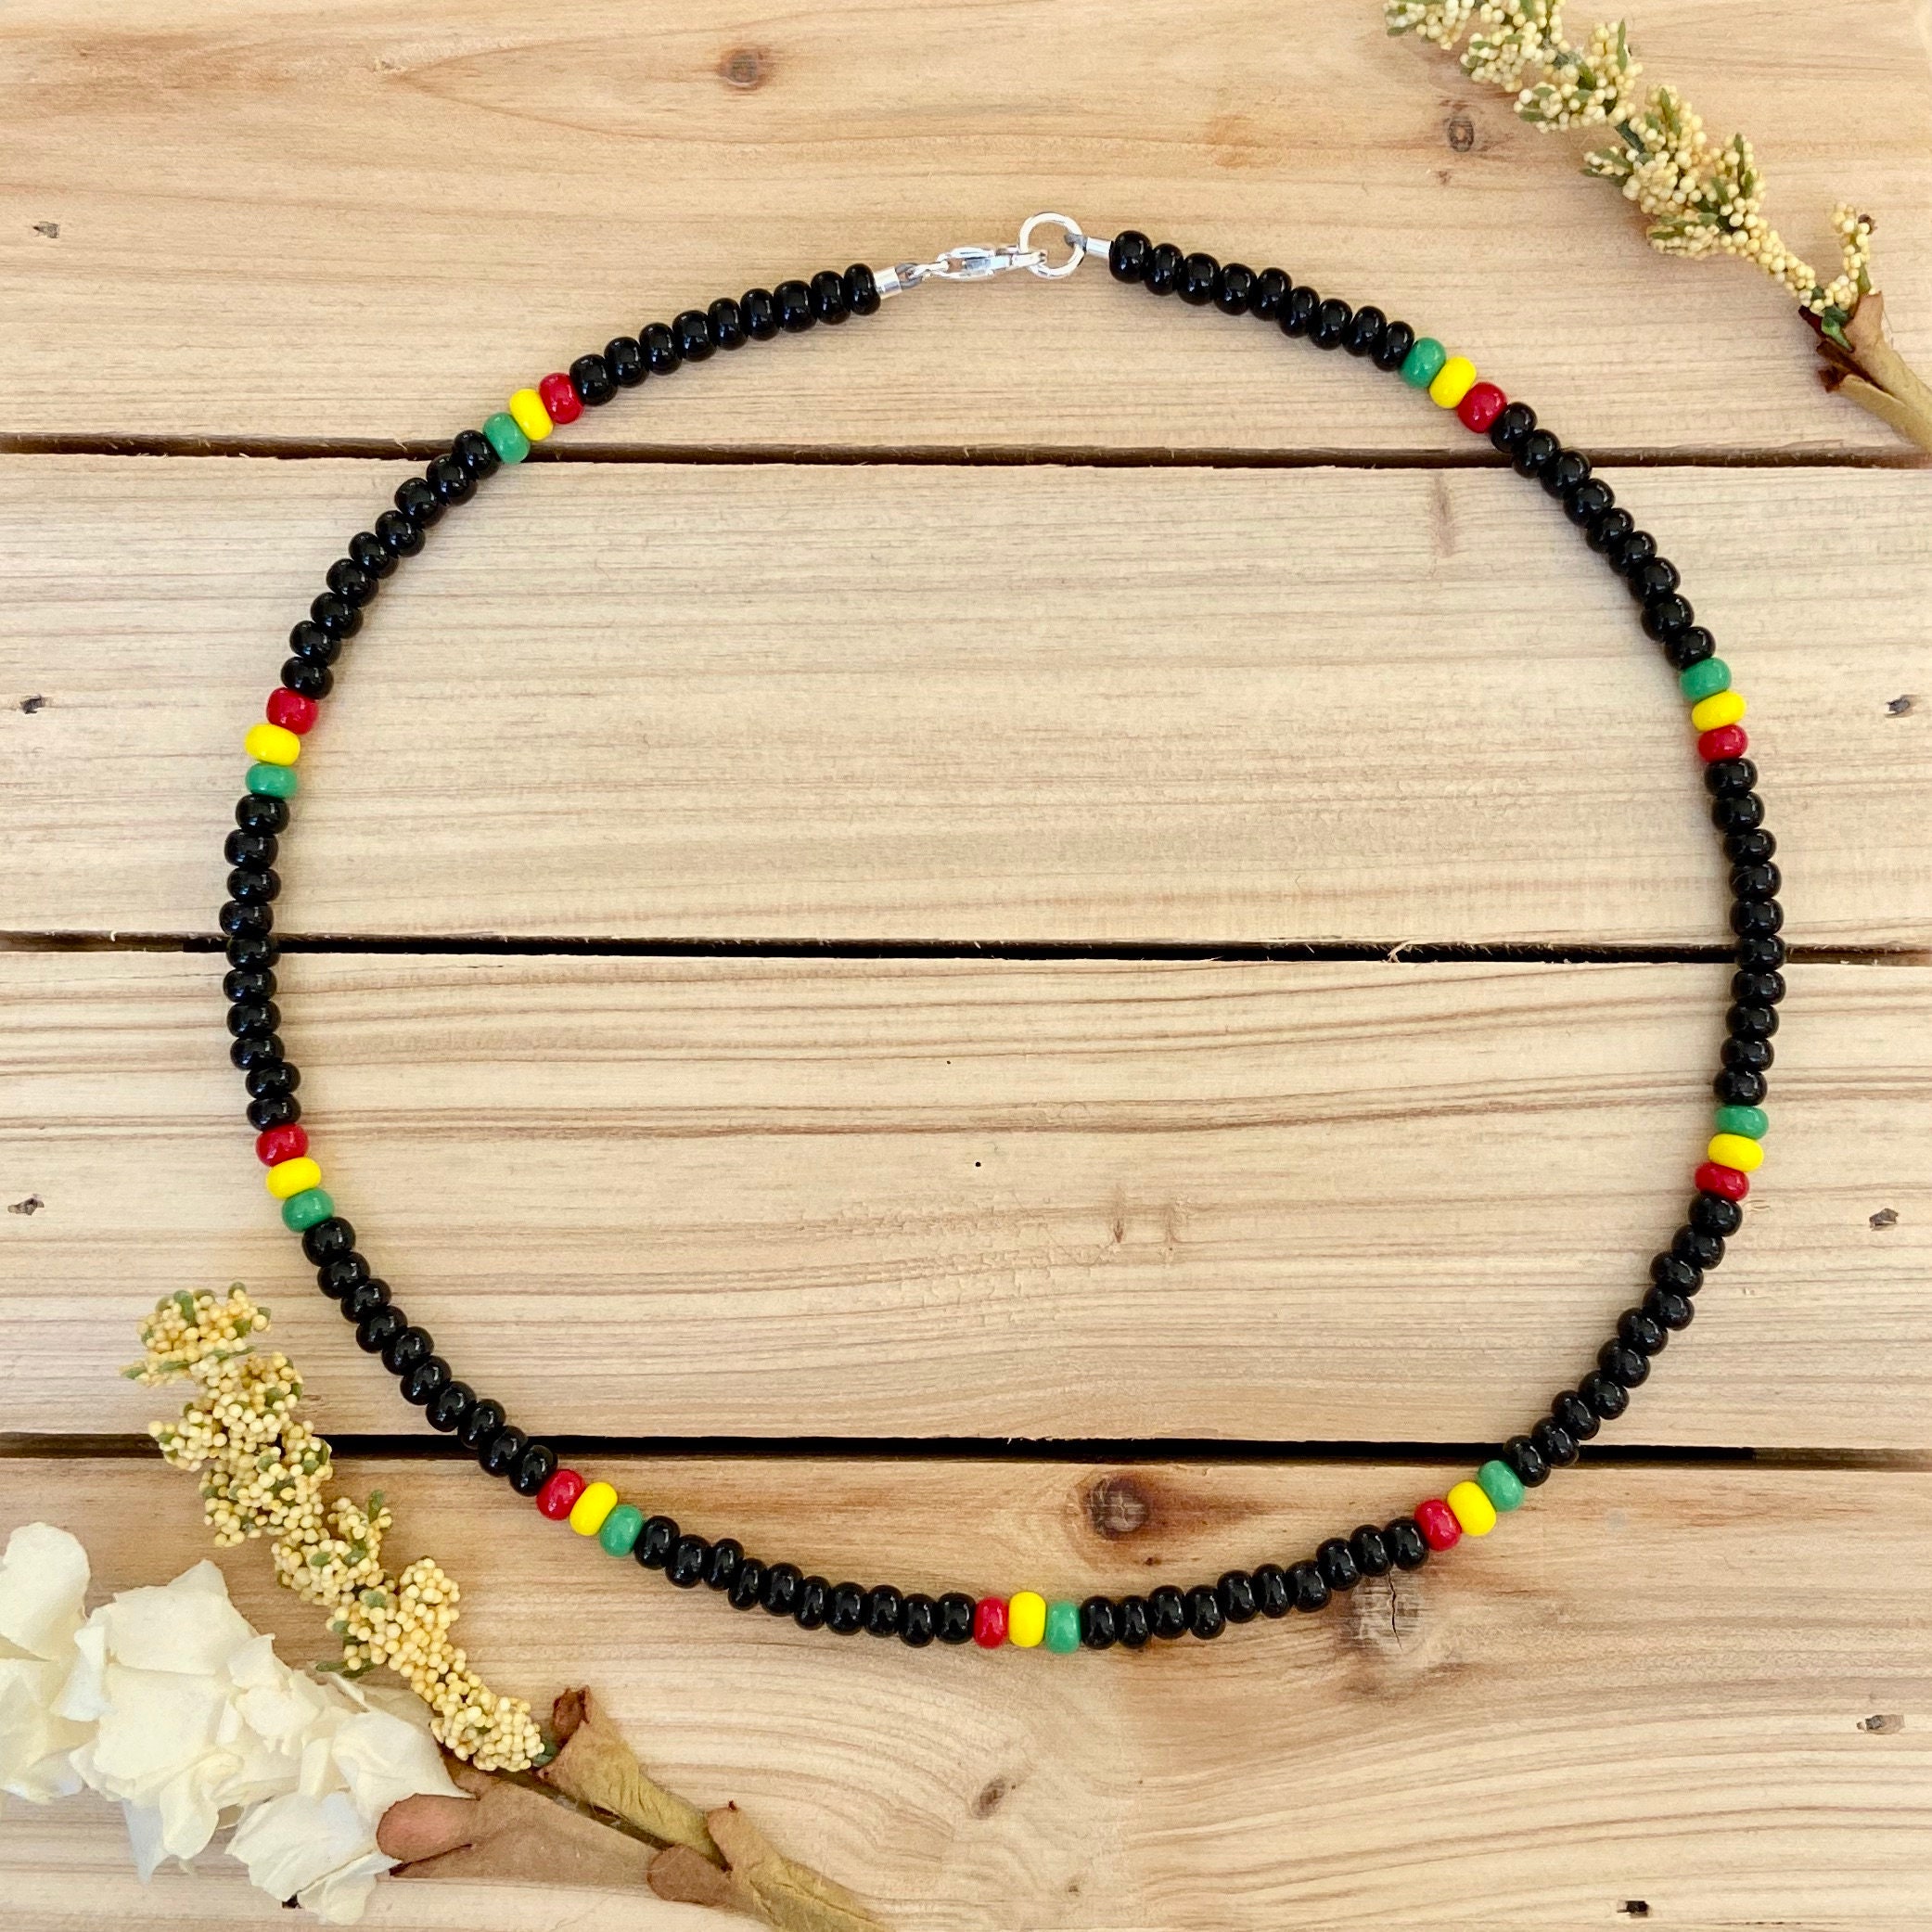 Jamaica Colors Black Beads Necklace for Men